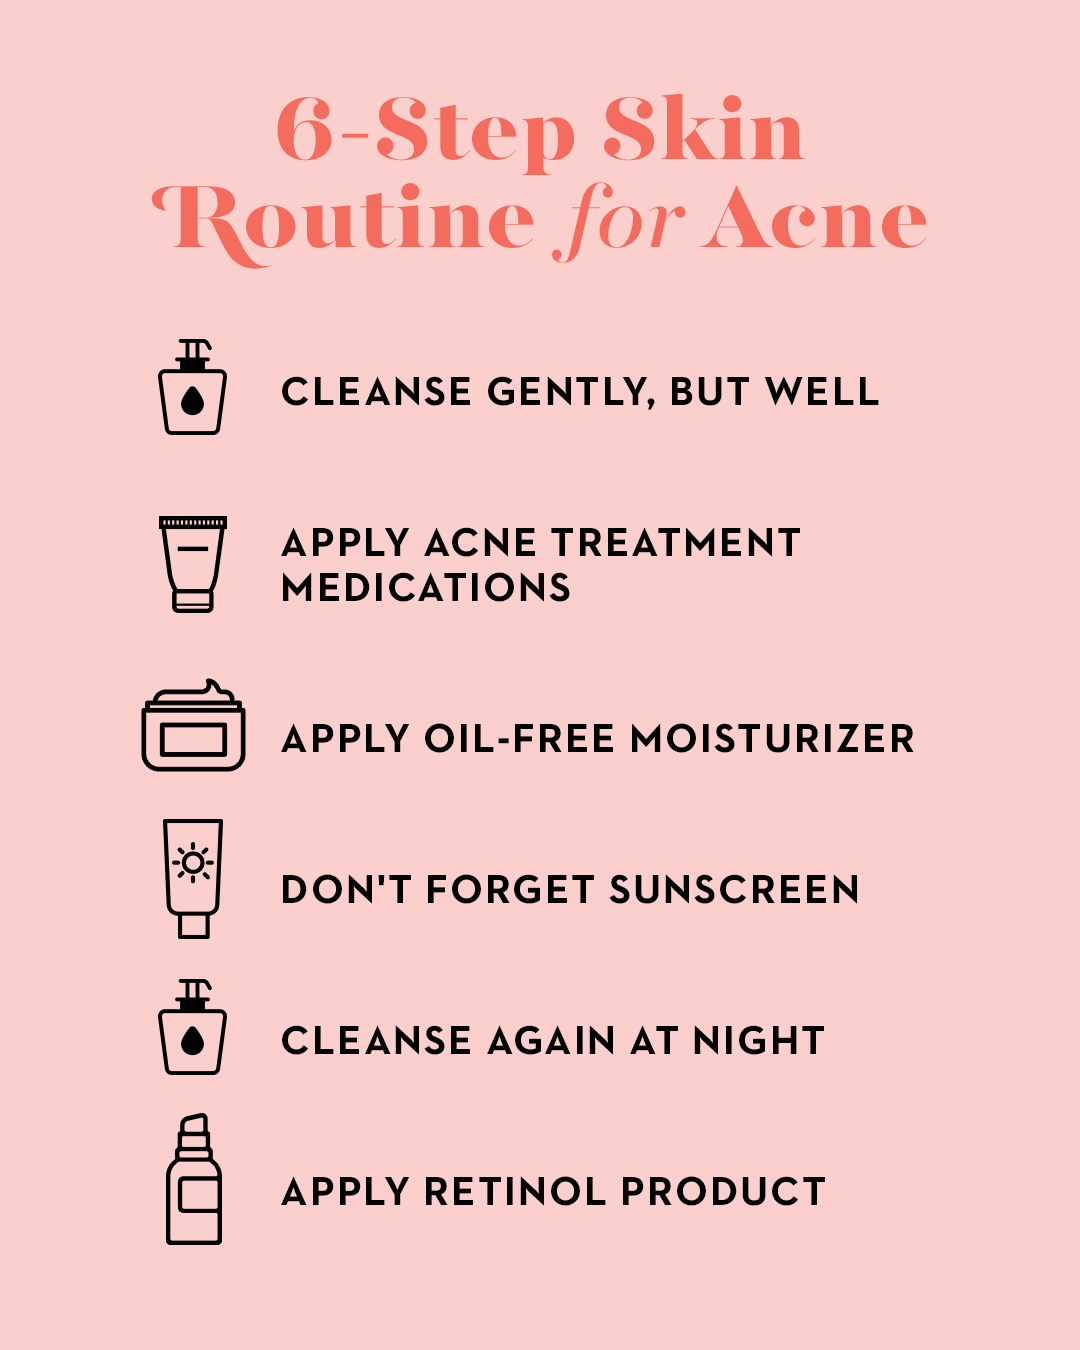 Managing Acne-Prone Skin: Top Tips From Stylish.ae